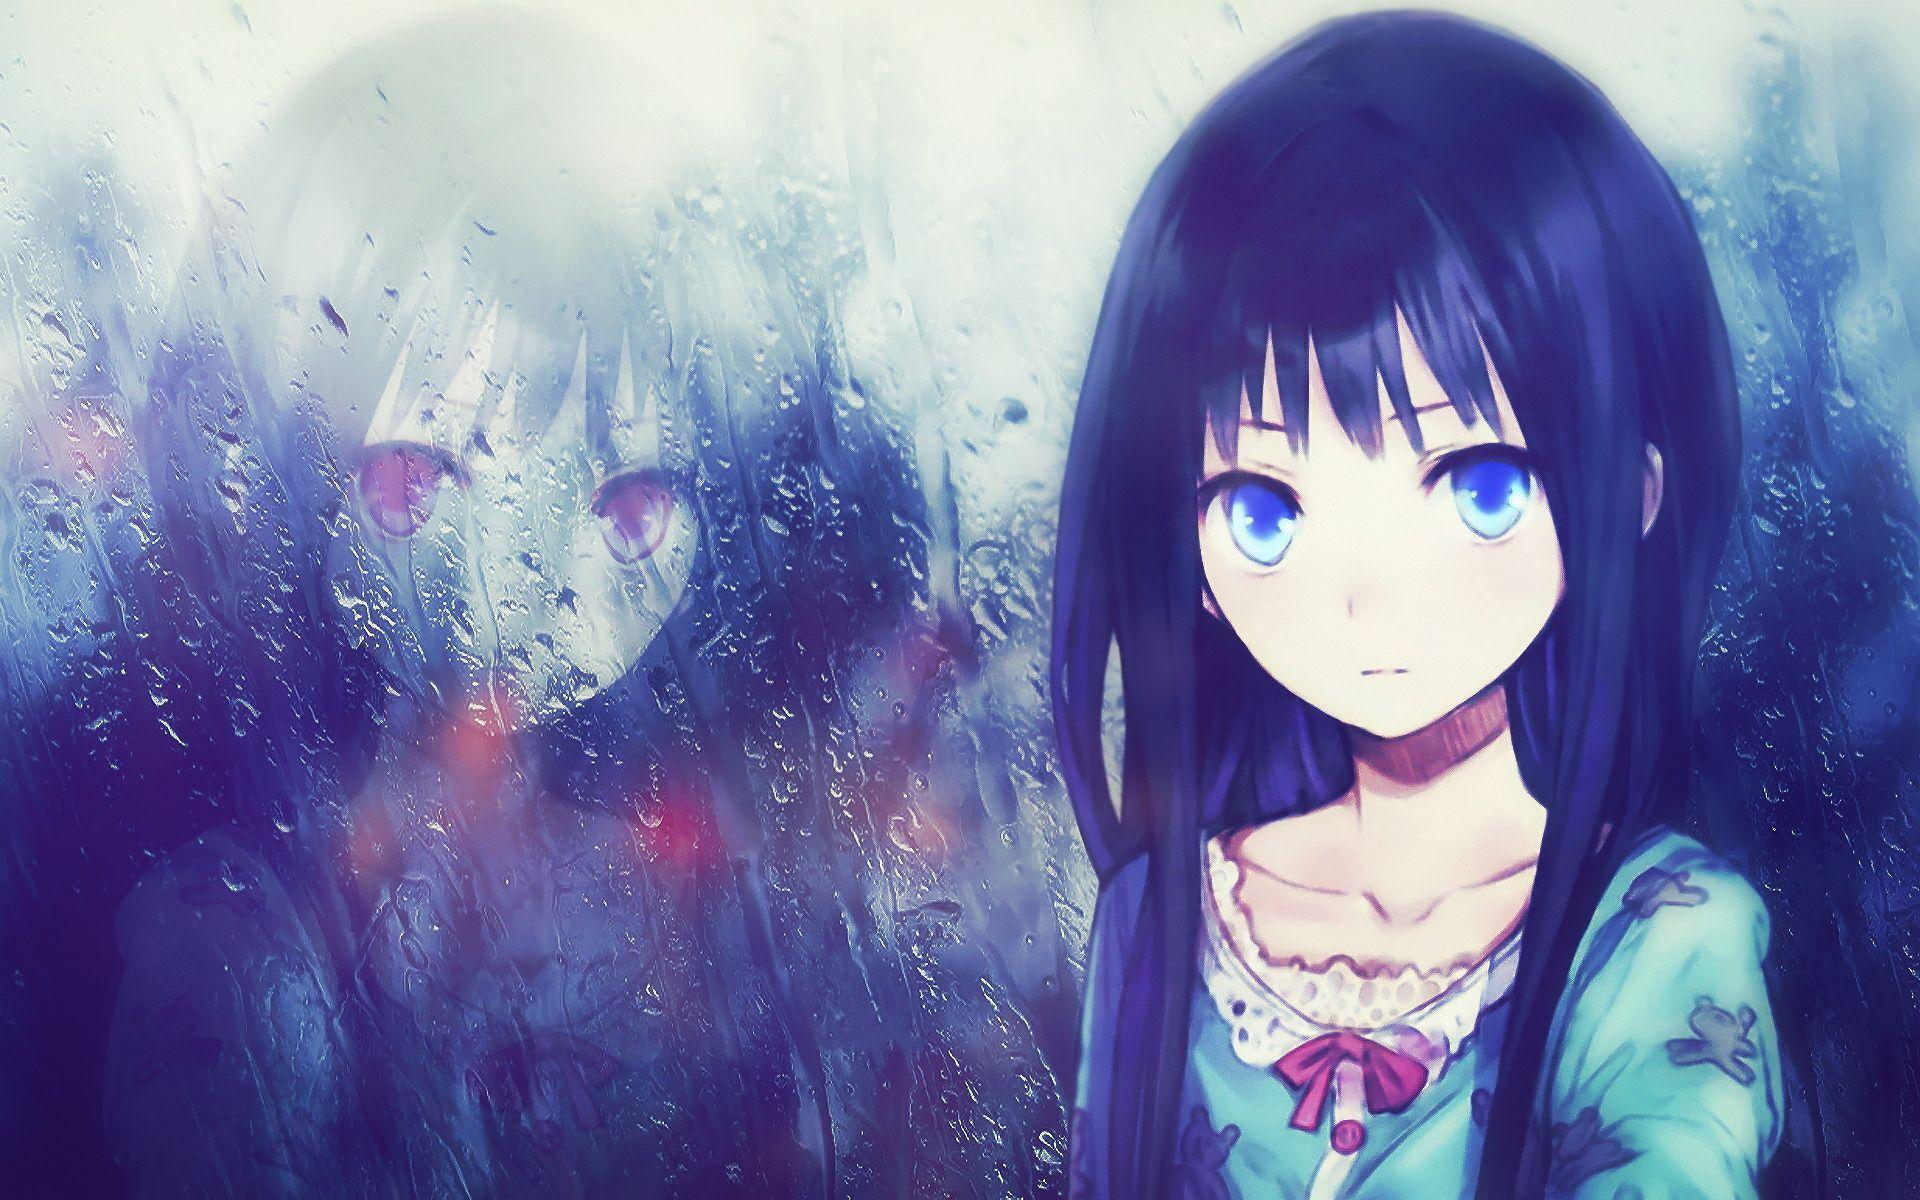 Anime Lonely Wallpaper. Lonely Anime Girl Wallpaper With